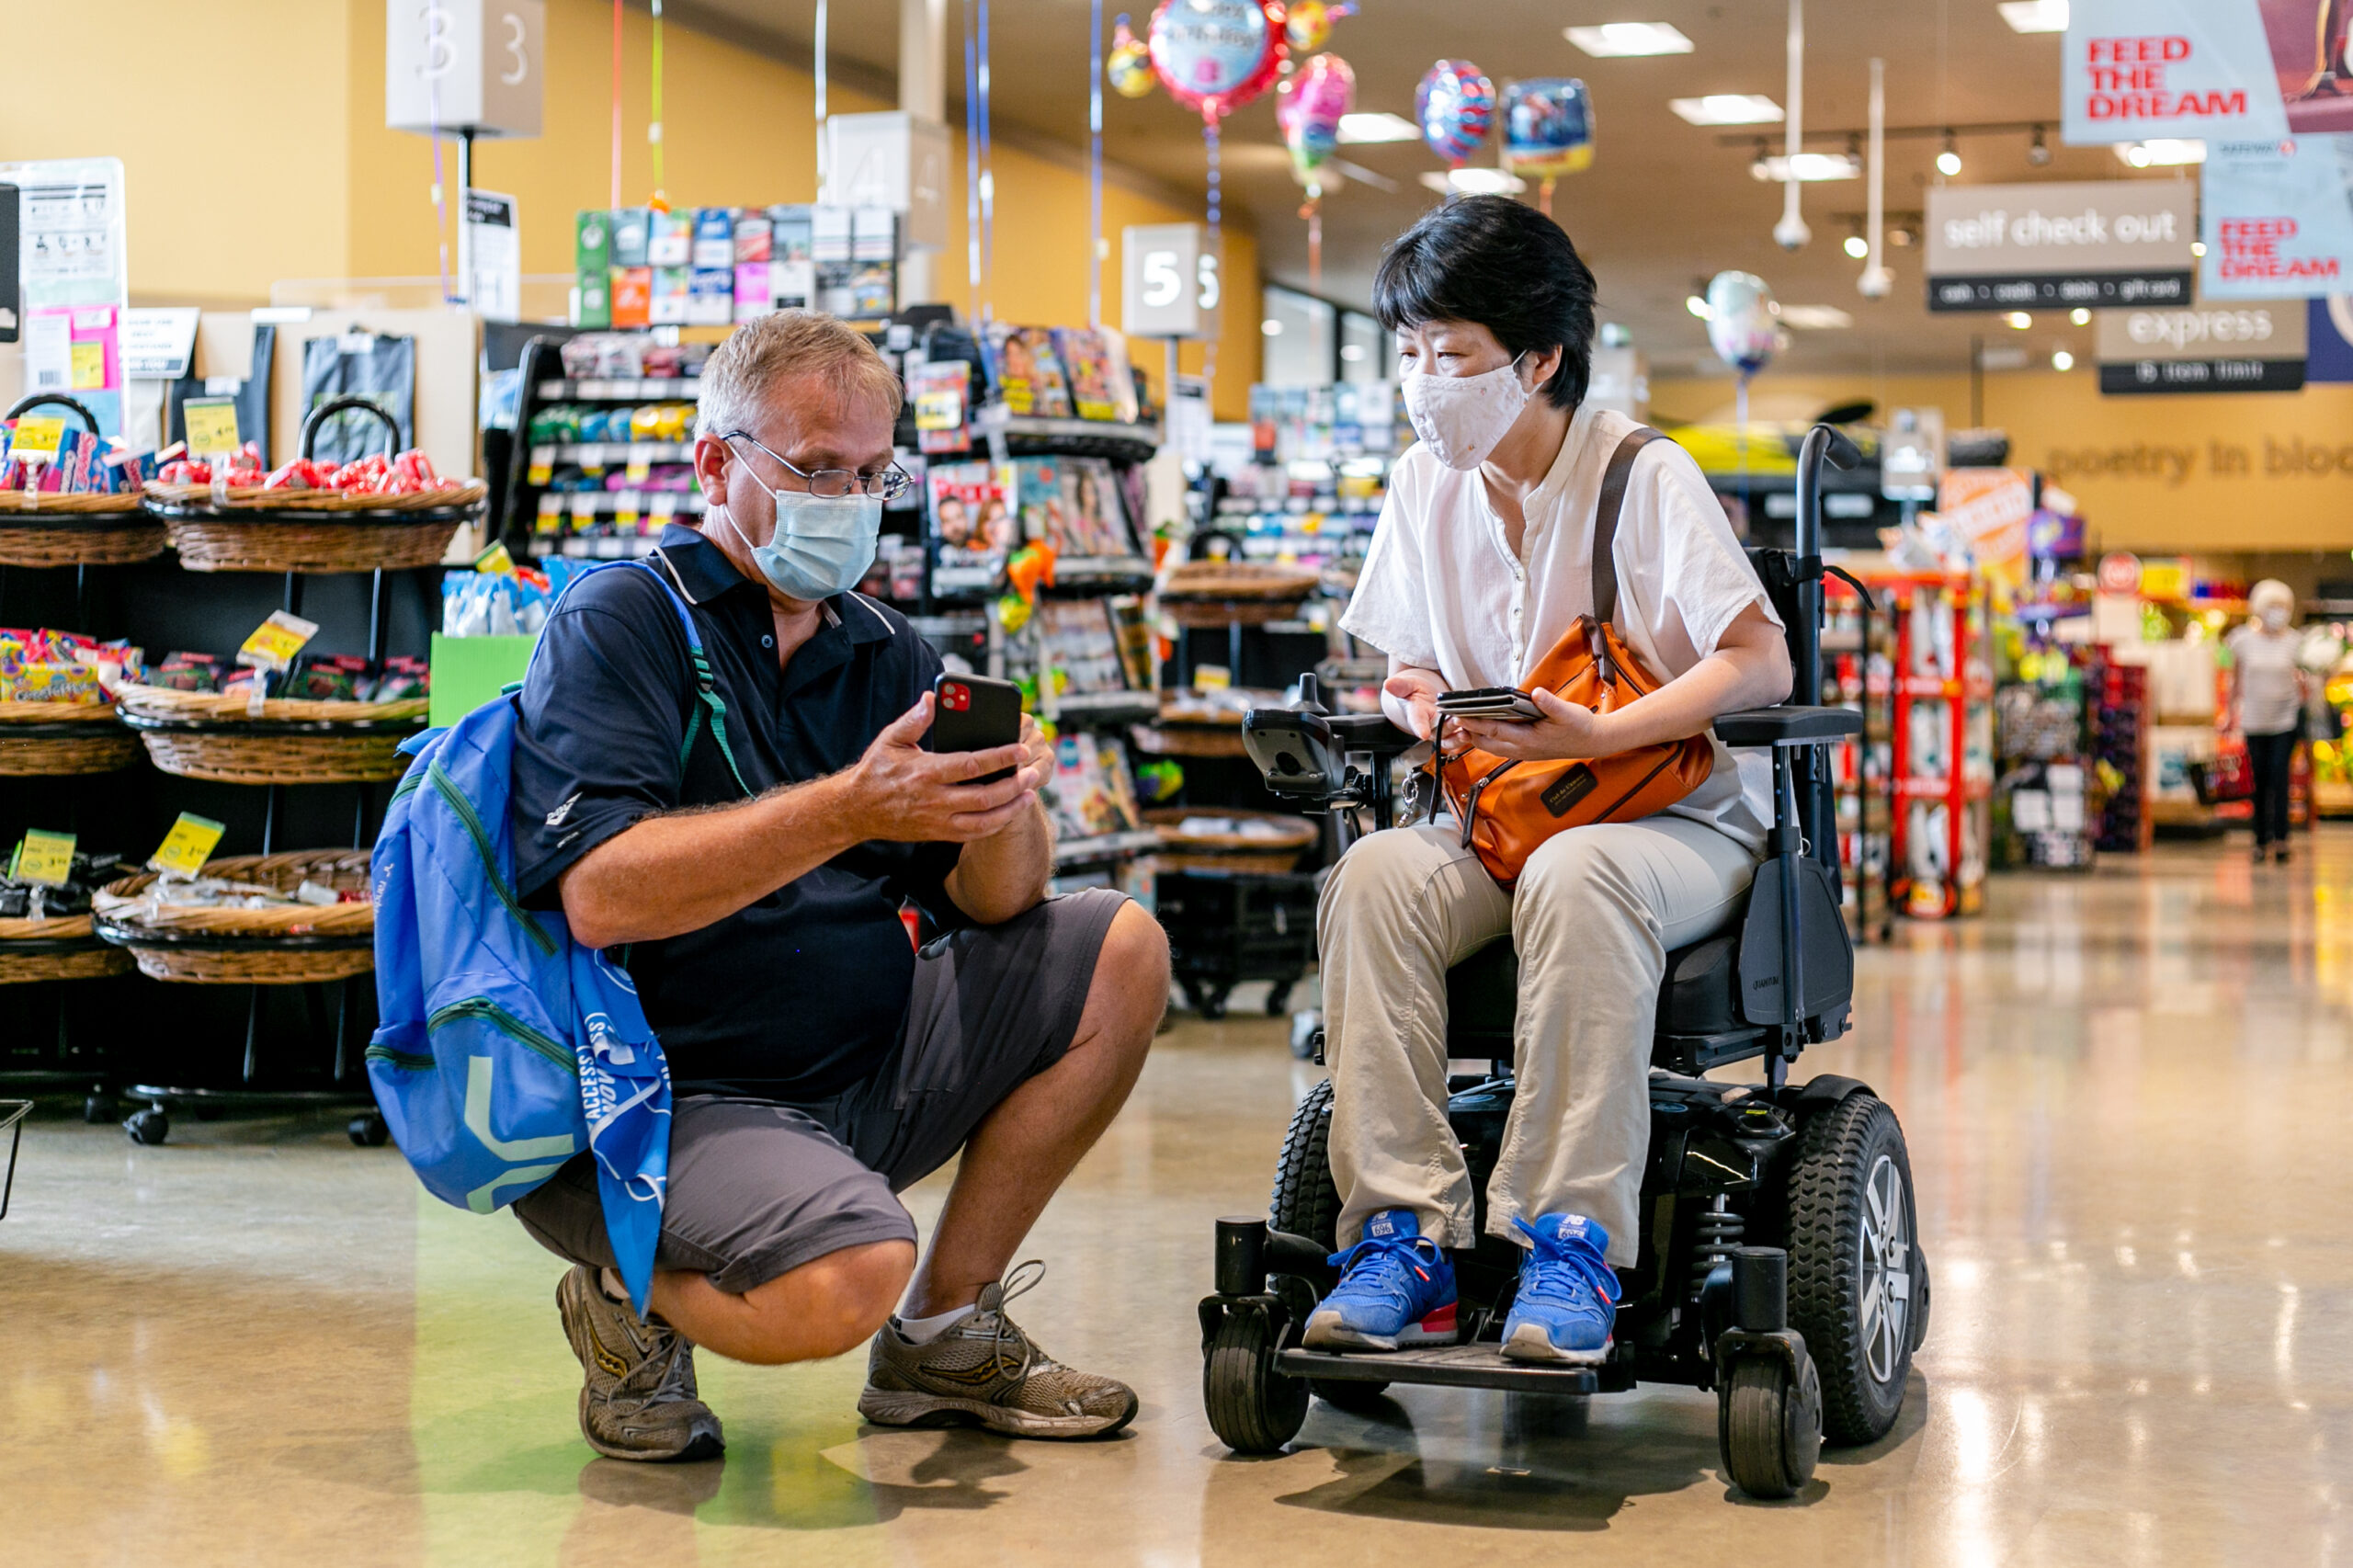 an asian woman sitting in a wheelchair and a white man both look at a mobile phone while inside a grocery store